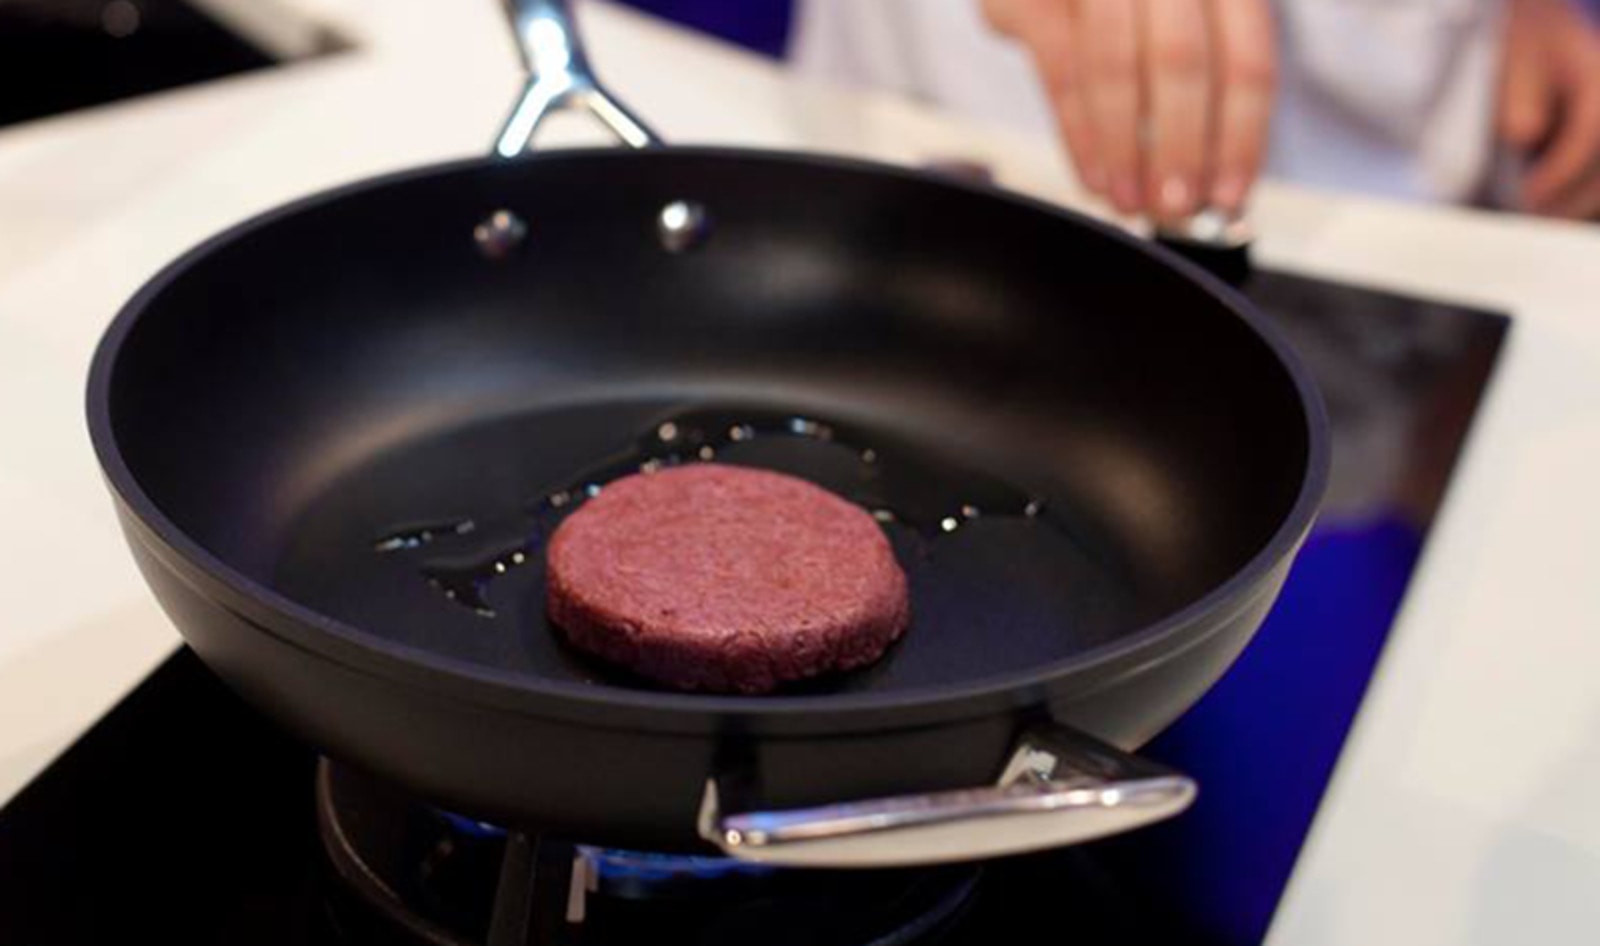 Price of Lab-Grown Meat to Plummet From $280,000 to $10 Per Patty By 2021